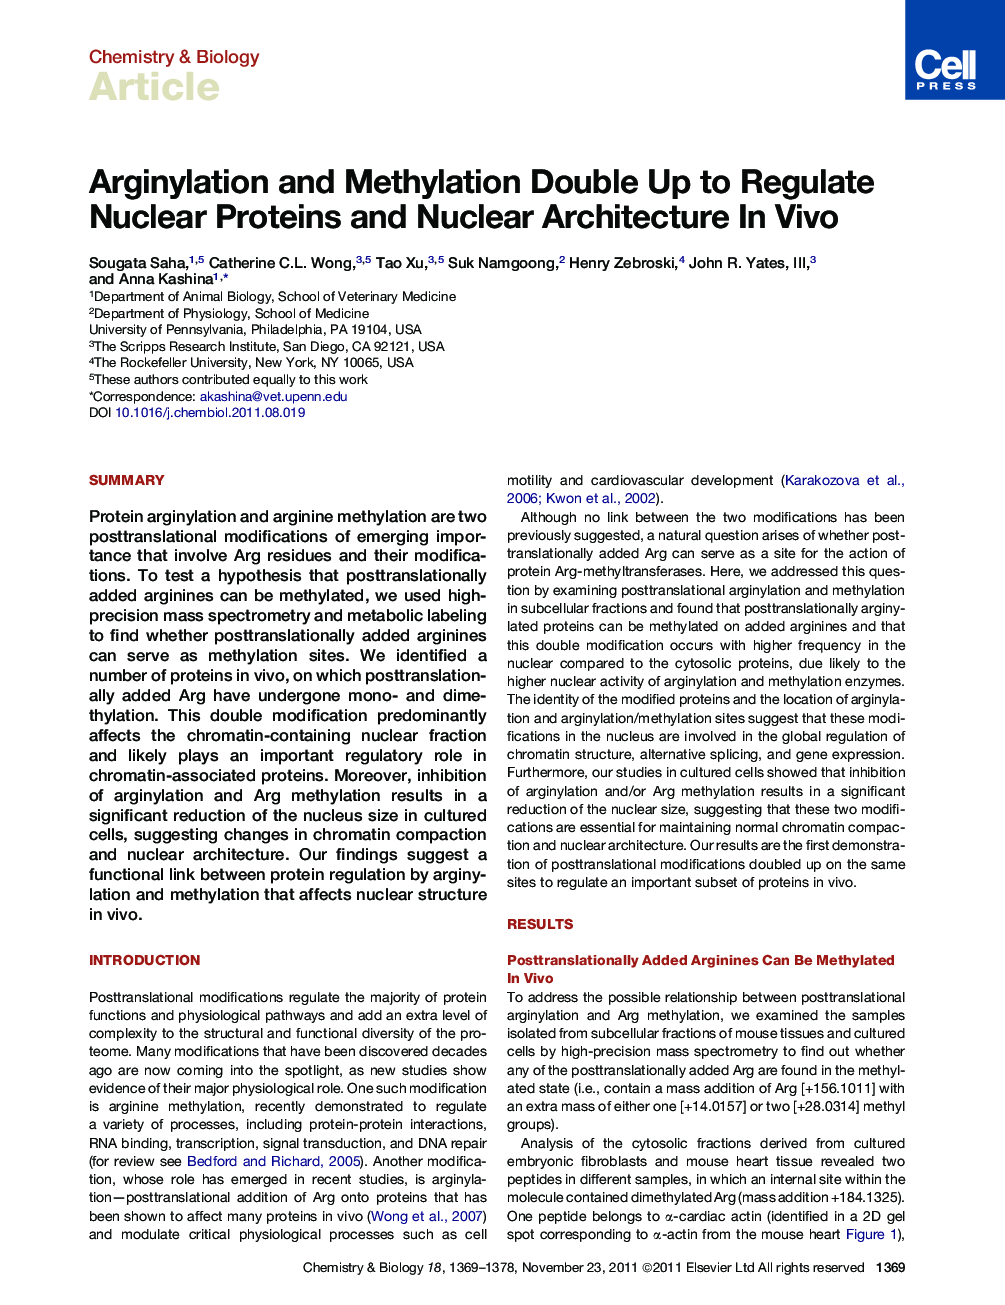 Arginylation and Methylation Double Up to Regulate Nuclear Proteins and Nuclear Architecture In Vivo